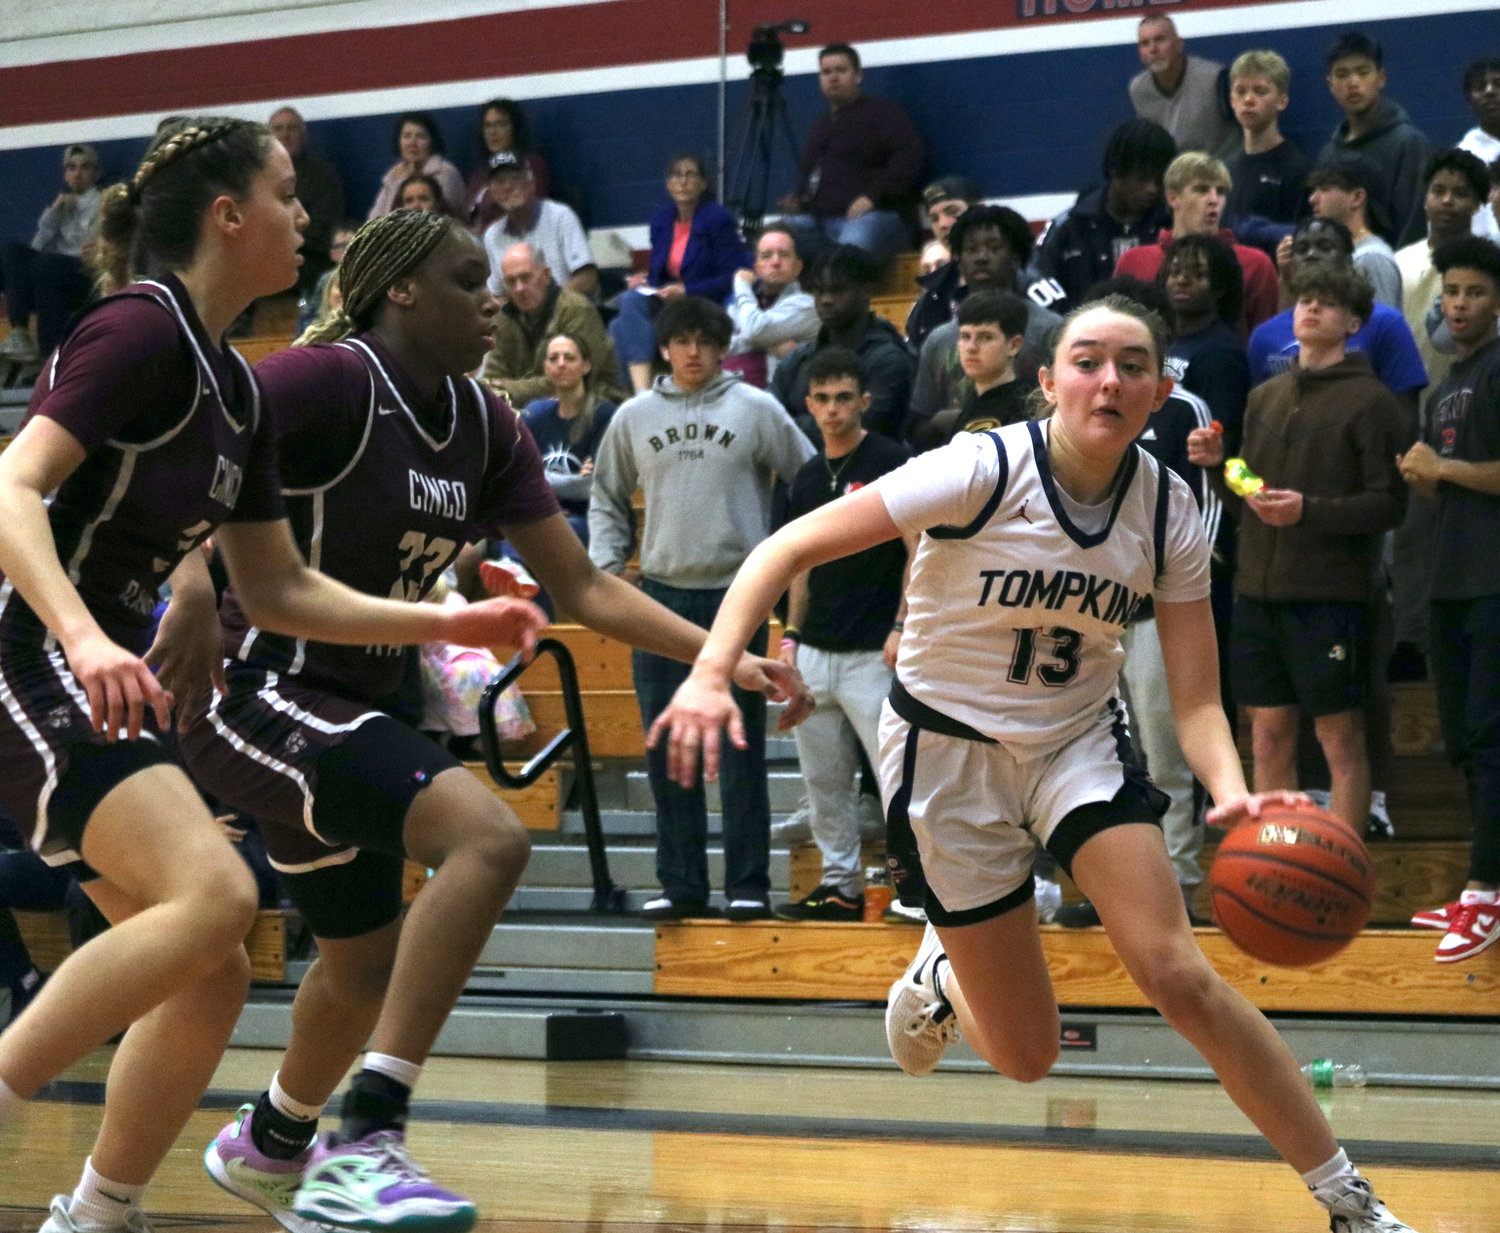 Macy Spencer drives baseline during Friday’s game between Tompkins and Cinco Ranch at the Tompkins gym.